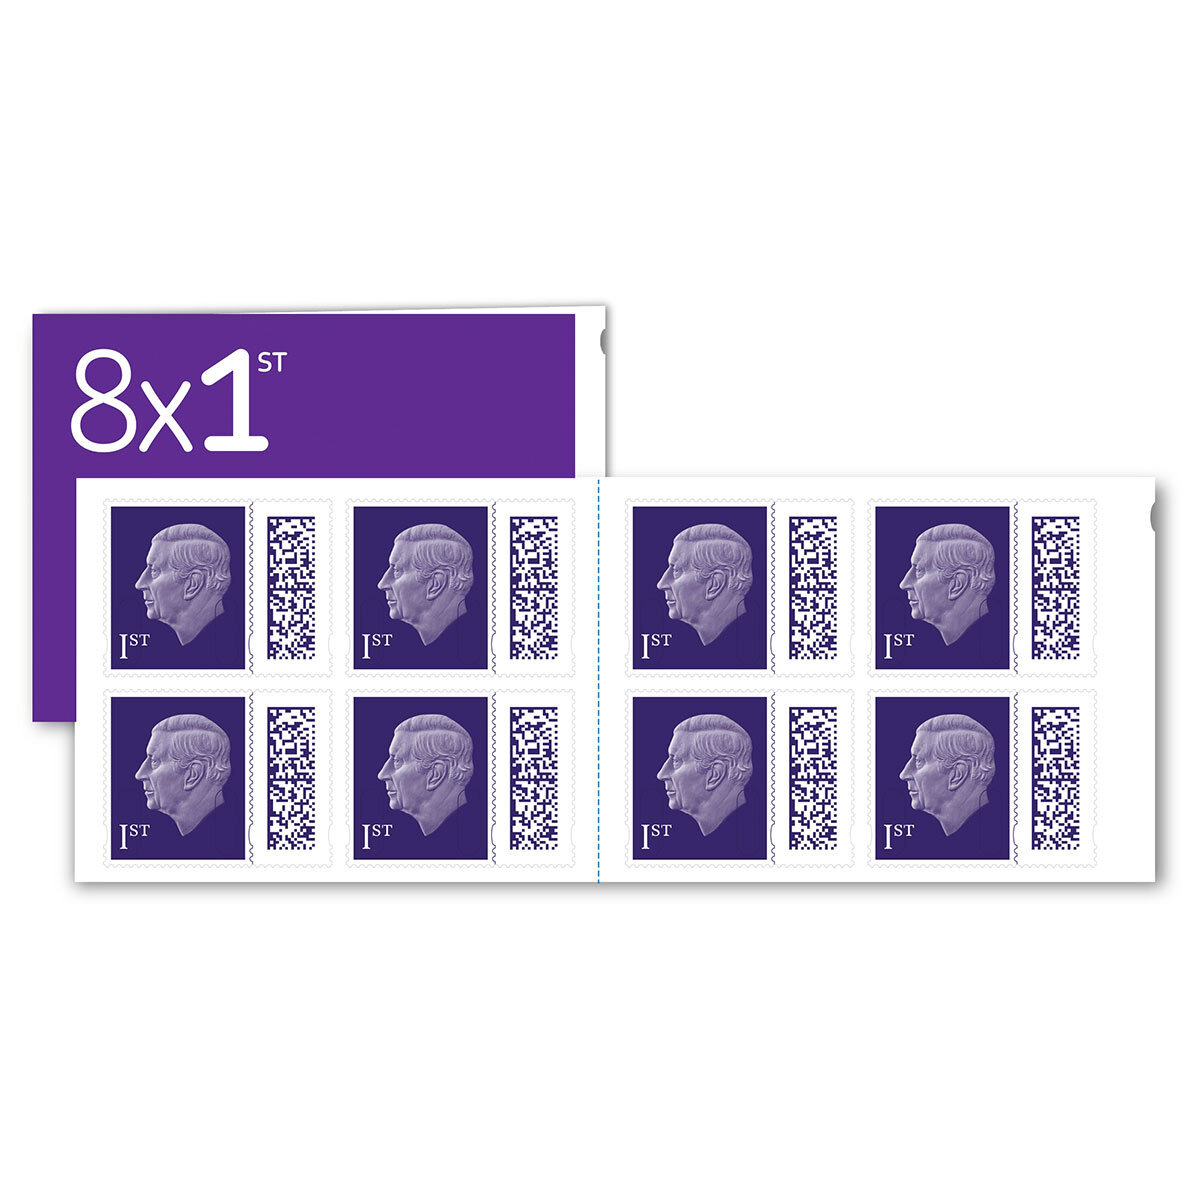 8 Books of 8 First Class Stamps (64 Stamps)